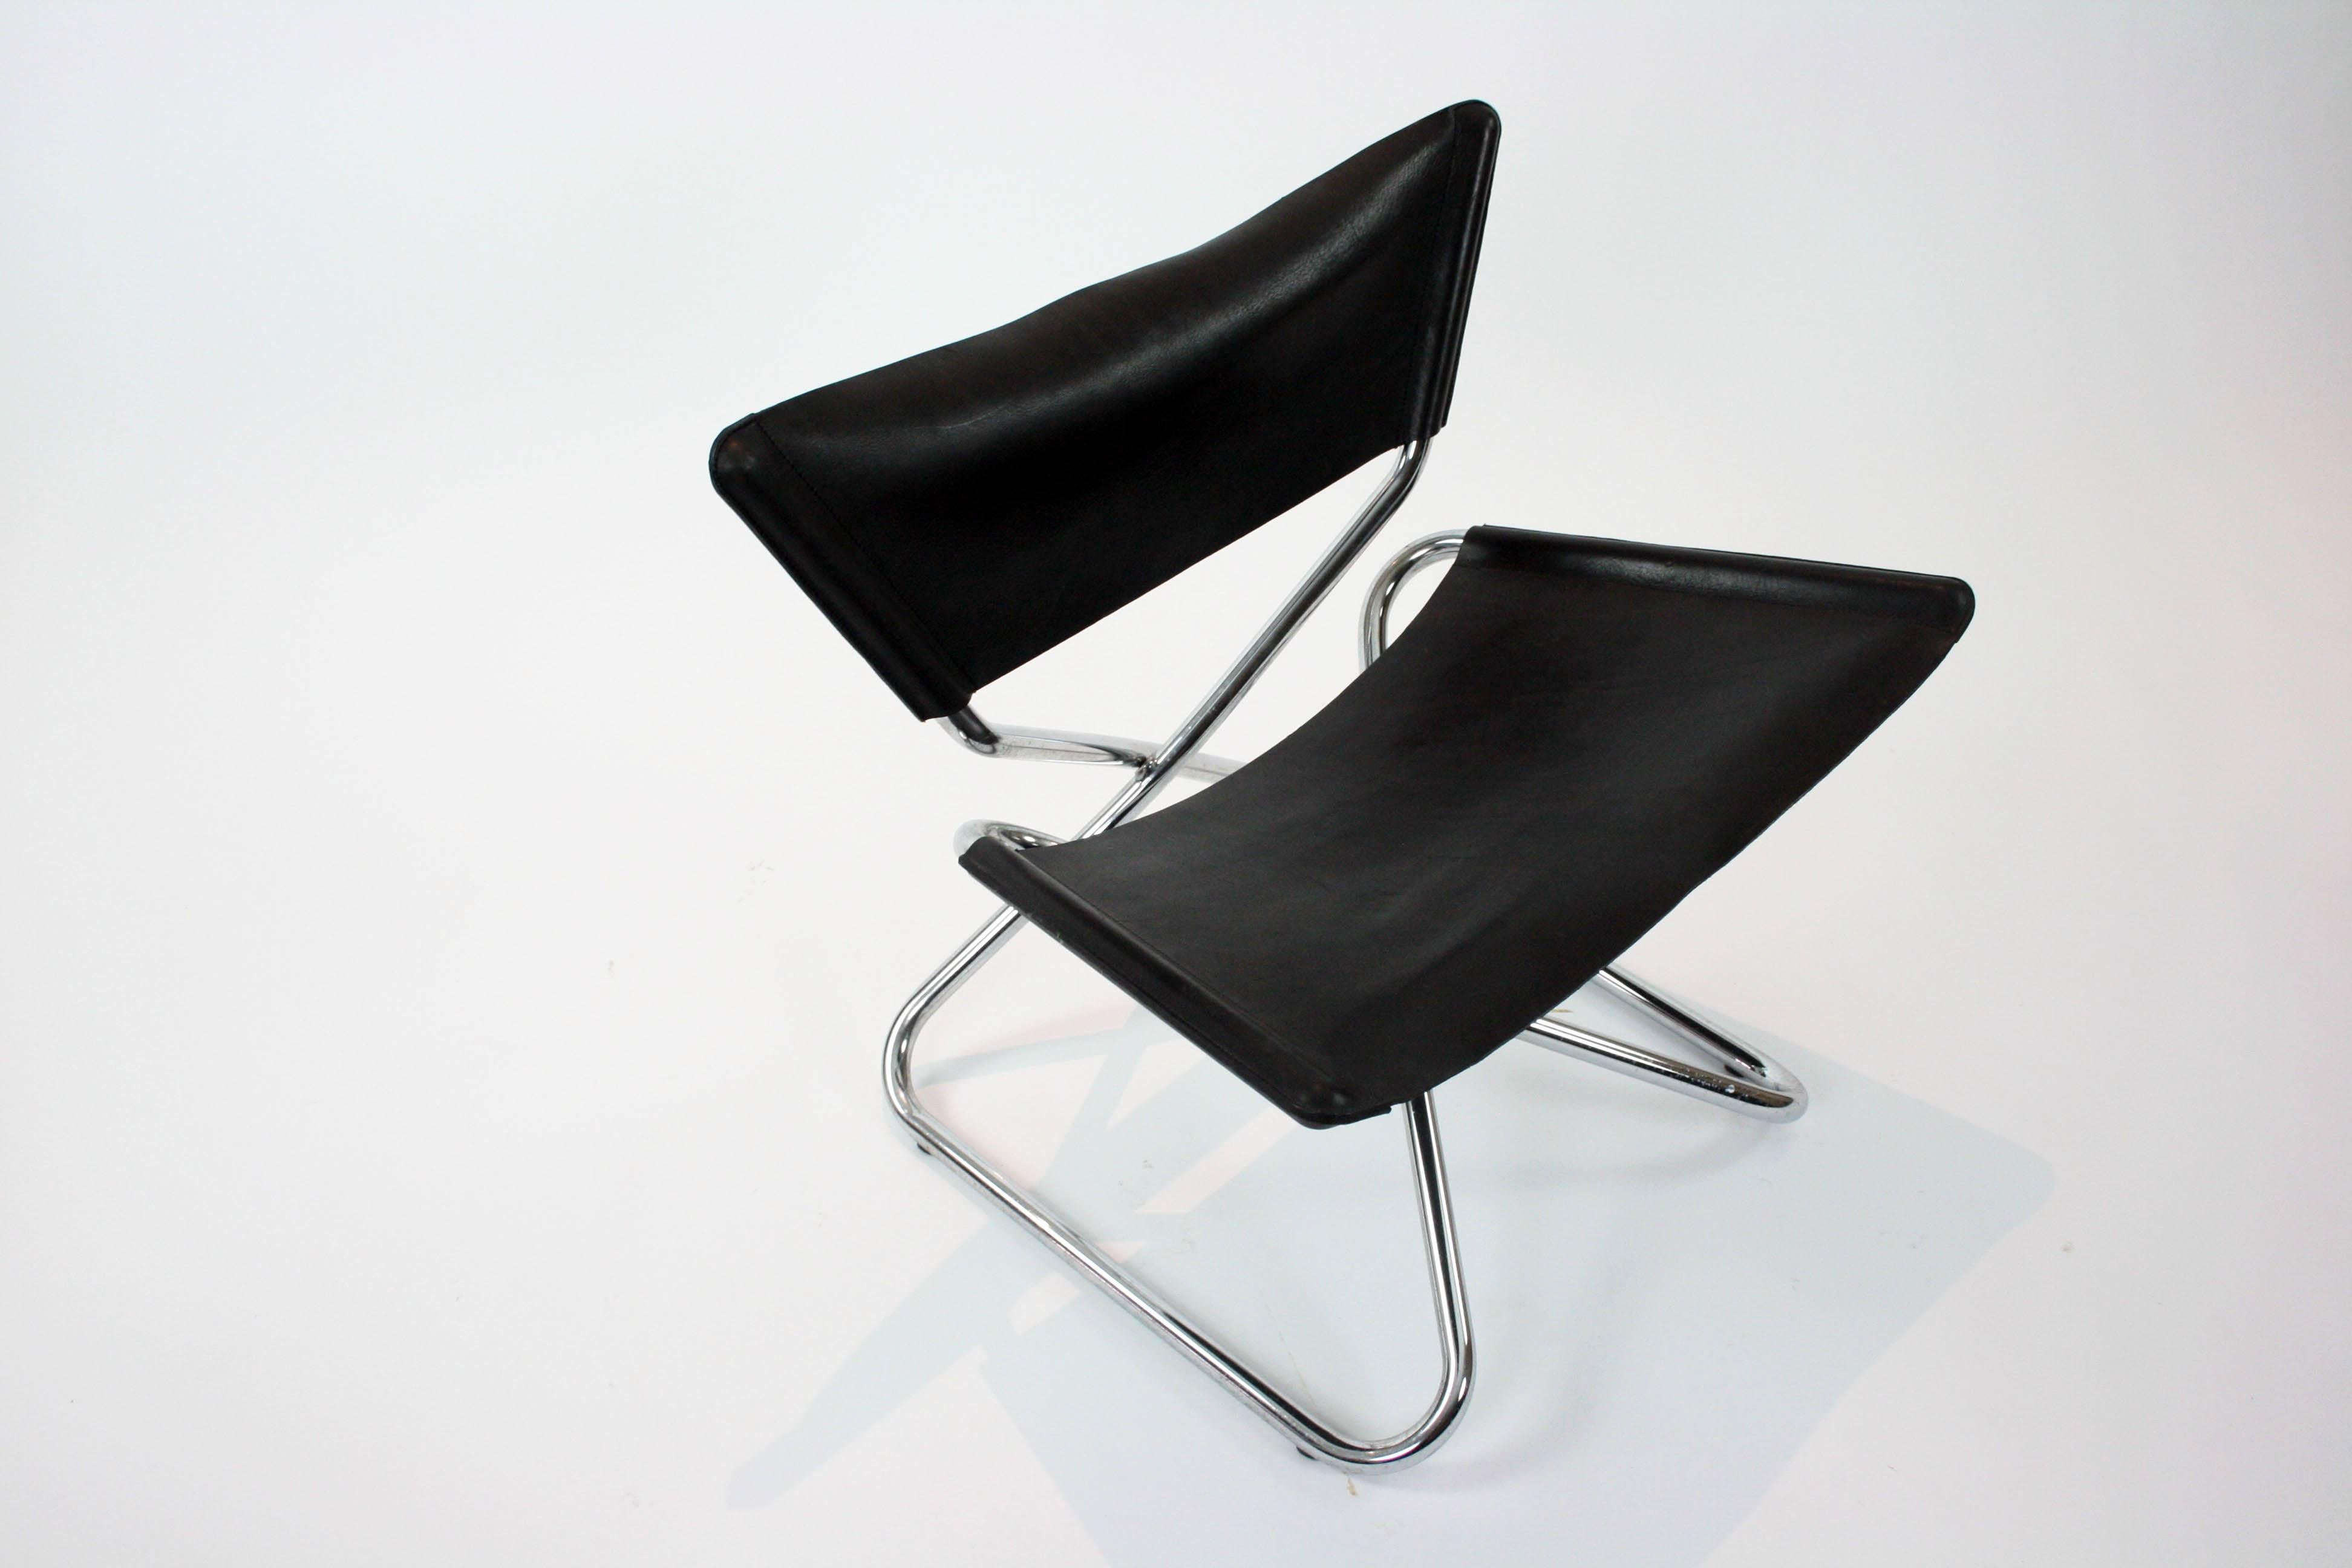 Folding steel tube frame. Thick black leather seat and back. Manufactured in Denmark by Engelbrechts. High quality production.